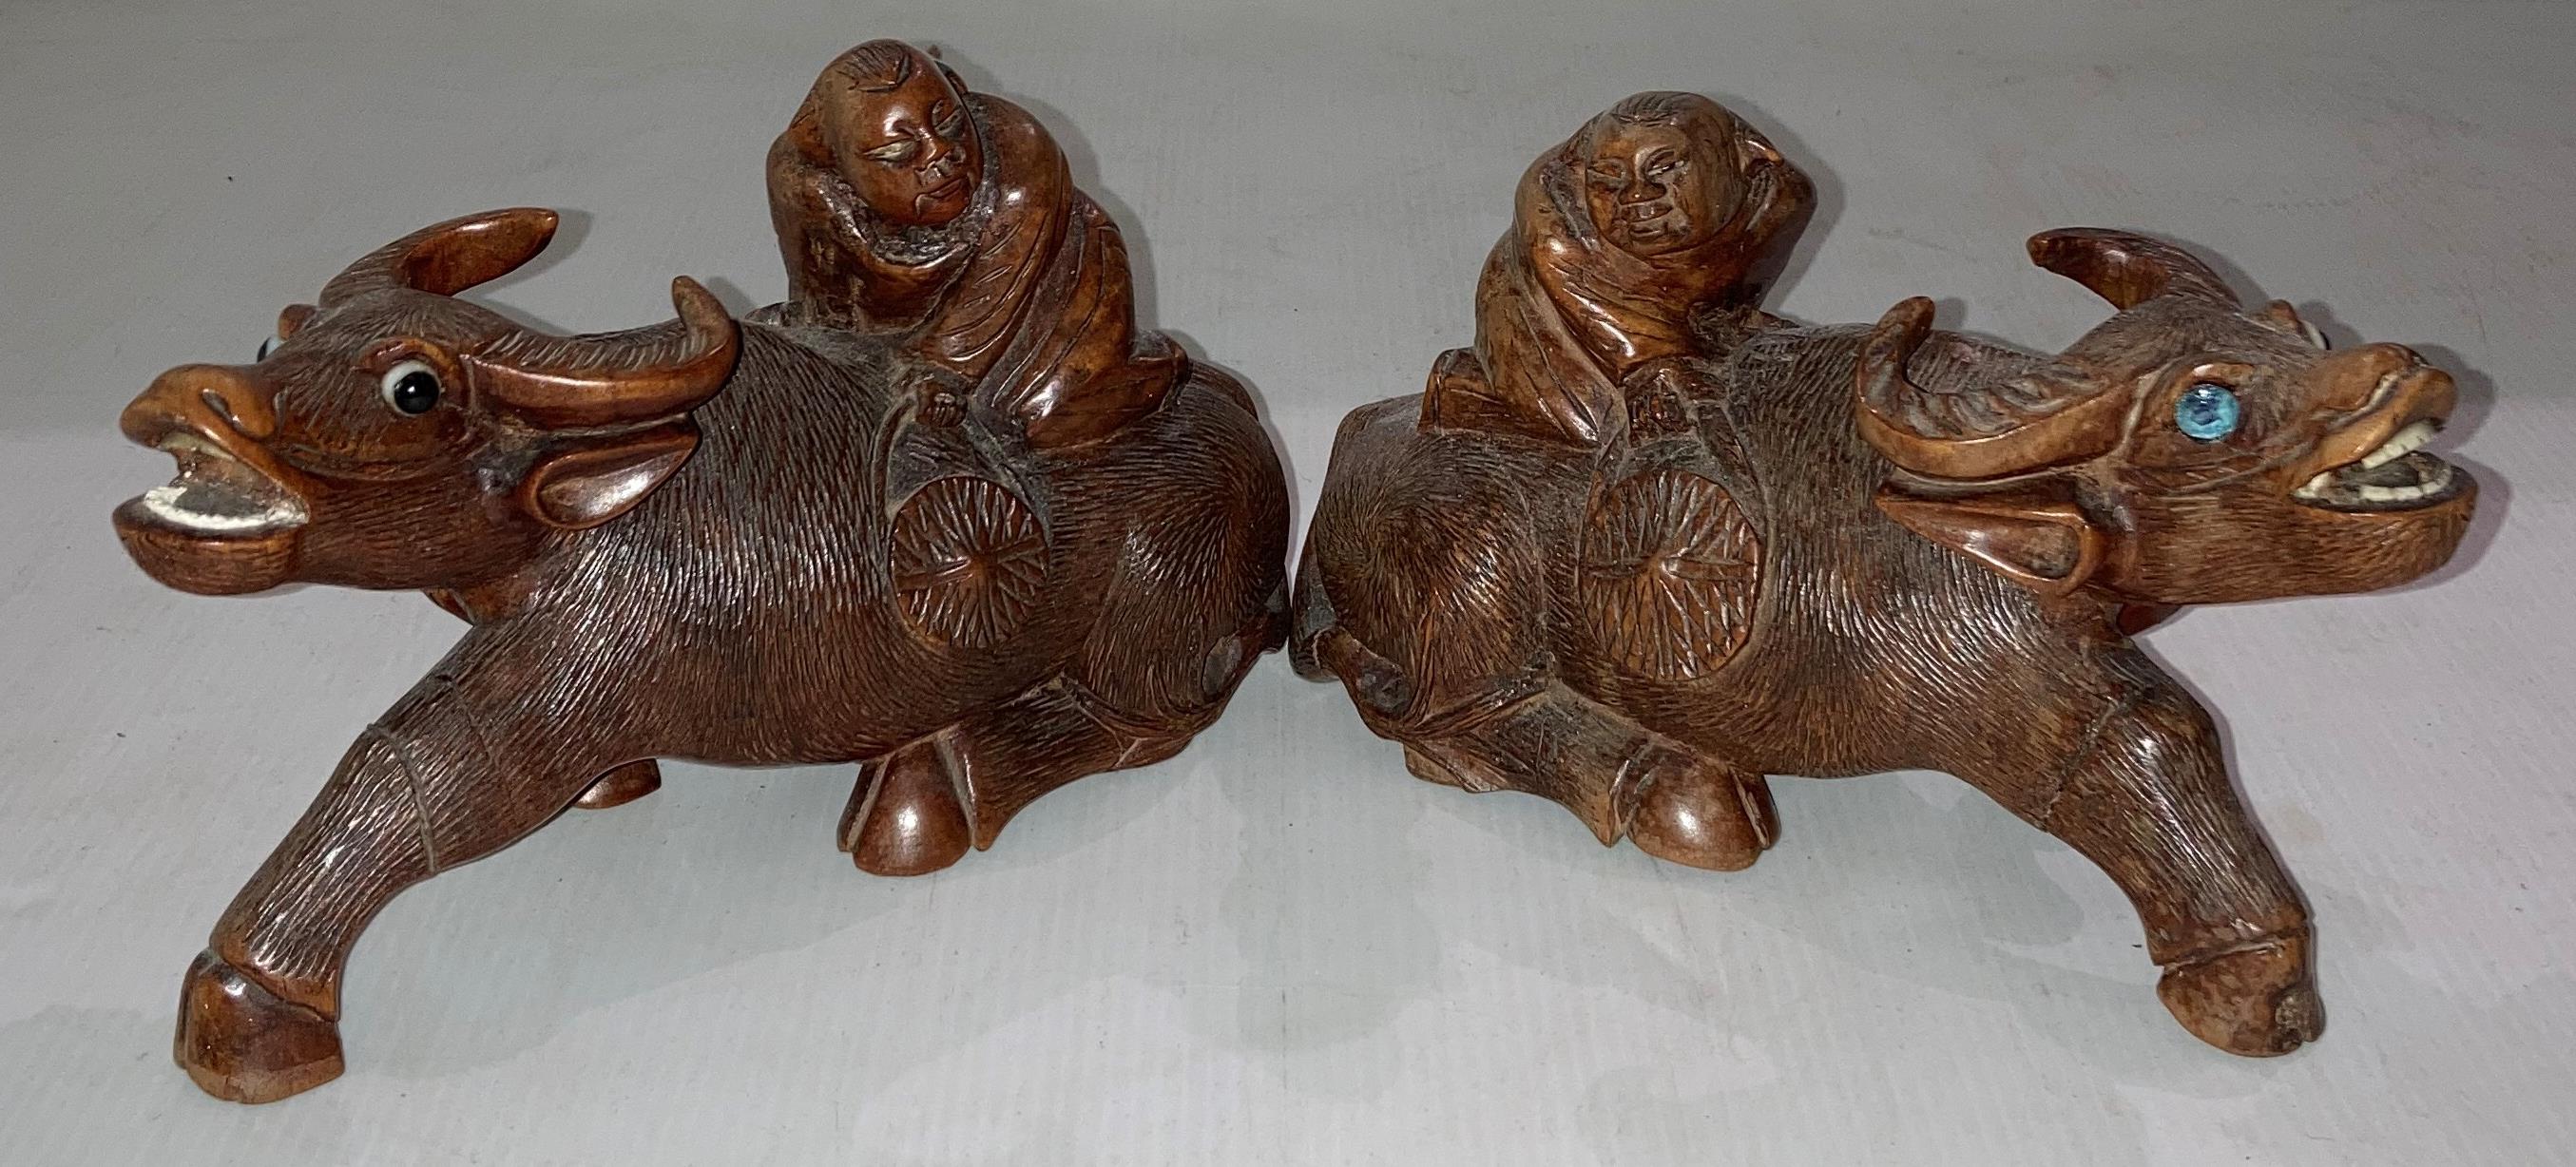 Pair of wooden hand-carved Oriental water buffalo with figures seated, approximately 10.